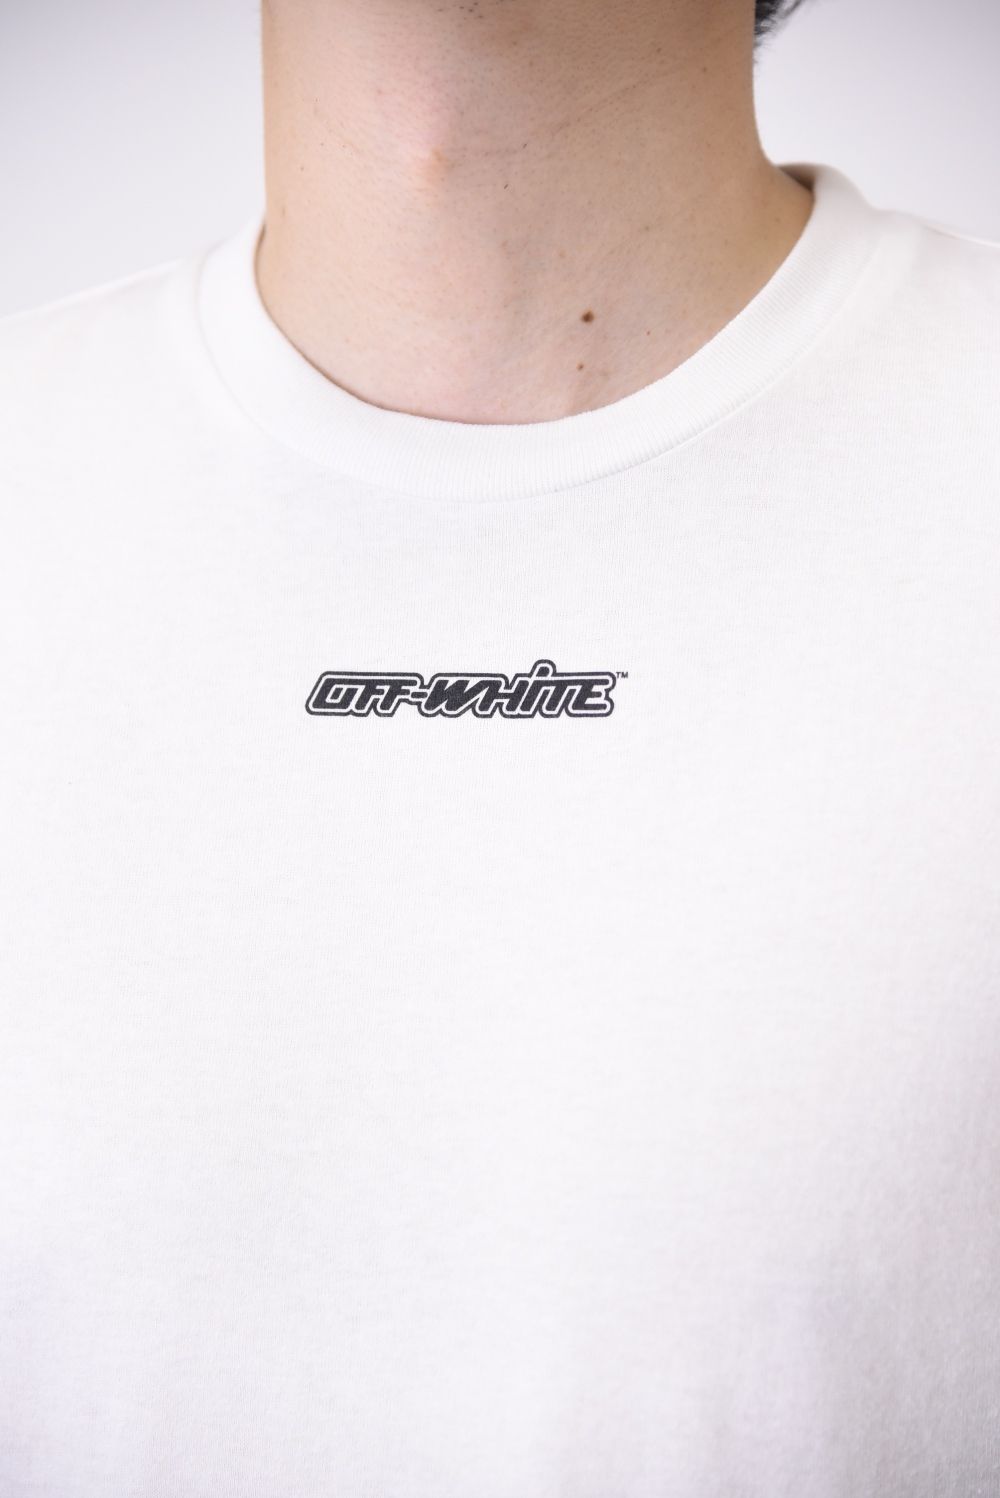 OFF-WHITE - MARKER ARROWS LS T-SHIRT / マーカー アローロゴ 